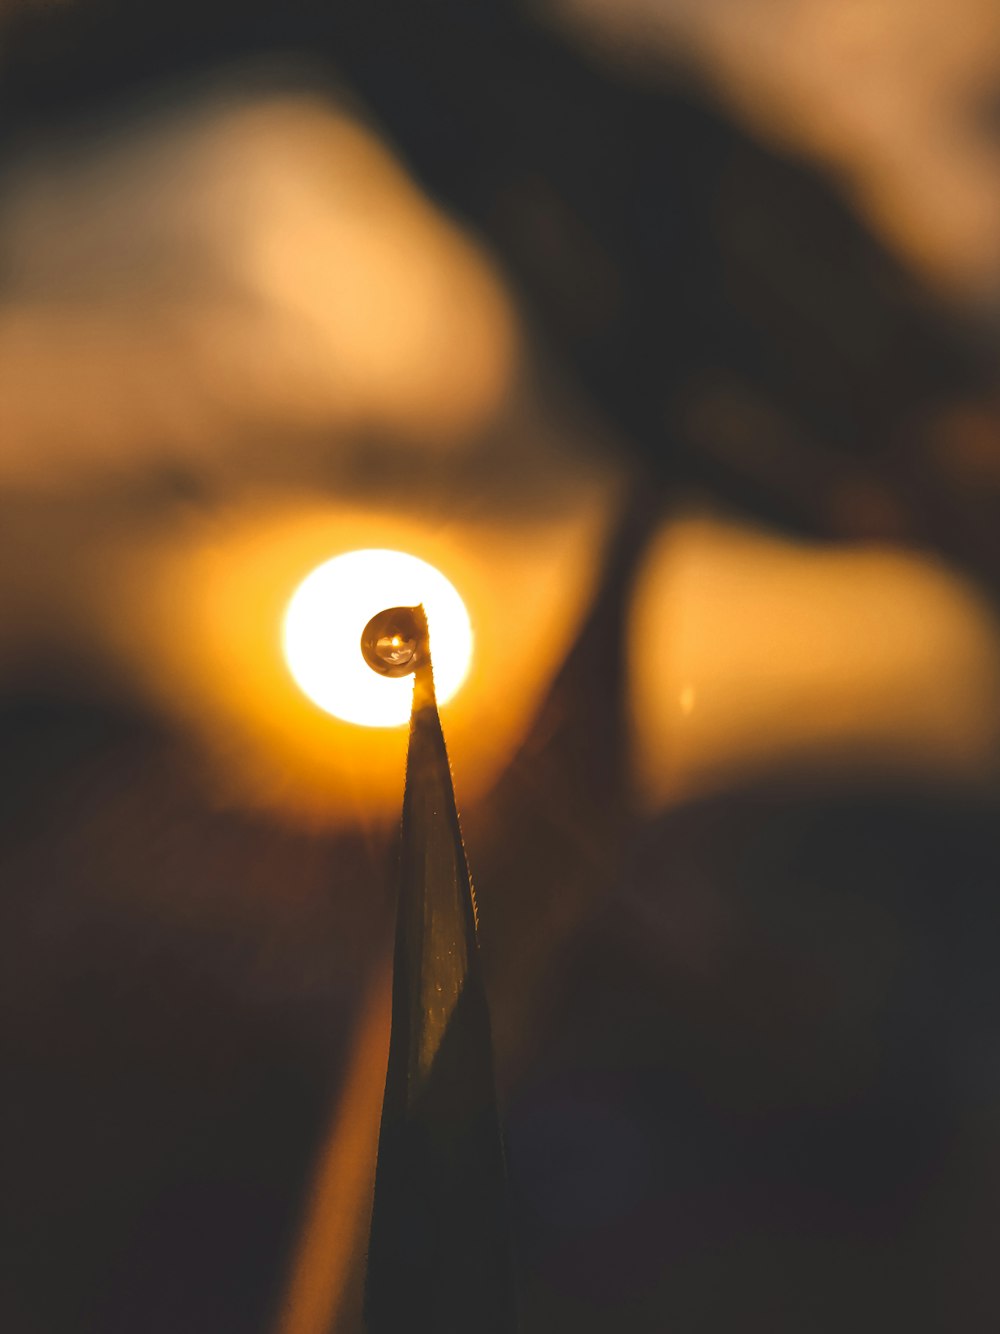 a close up of a light bulb with the sun in the background